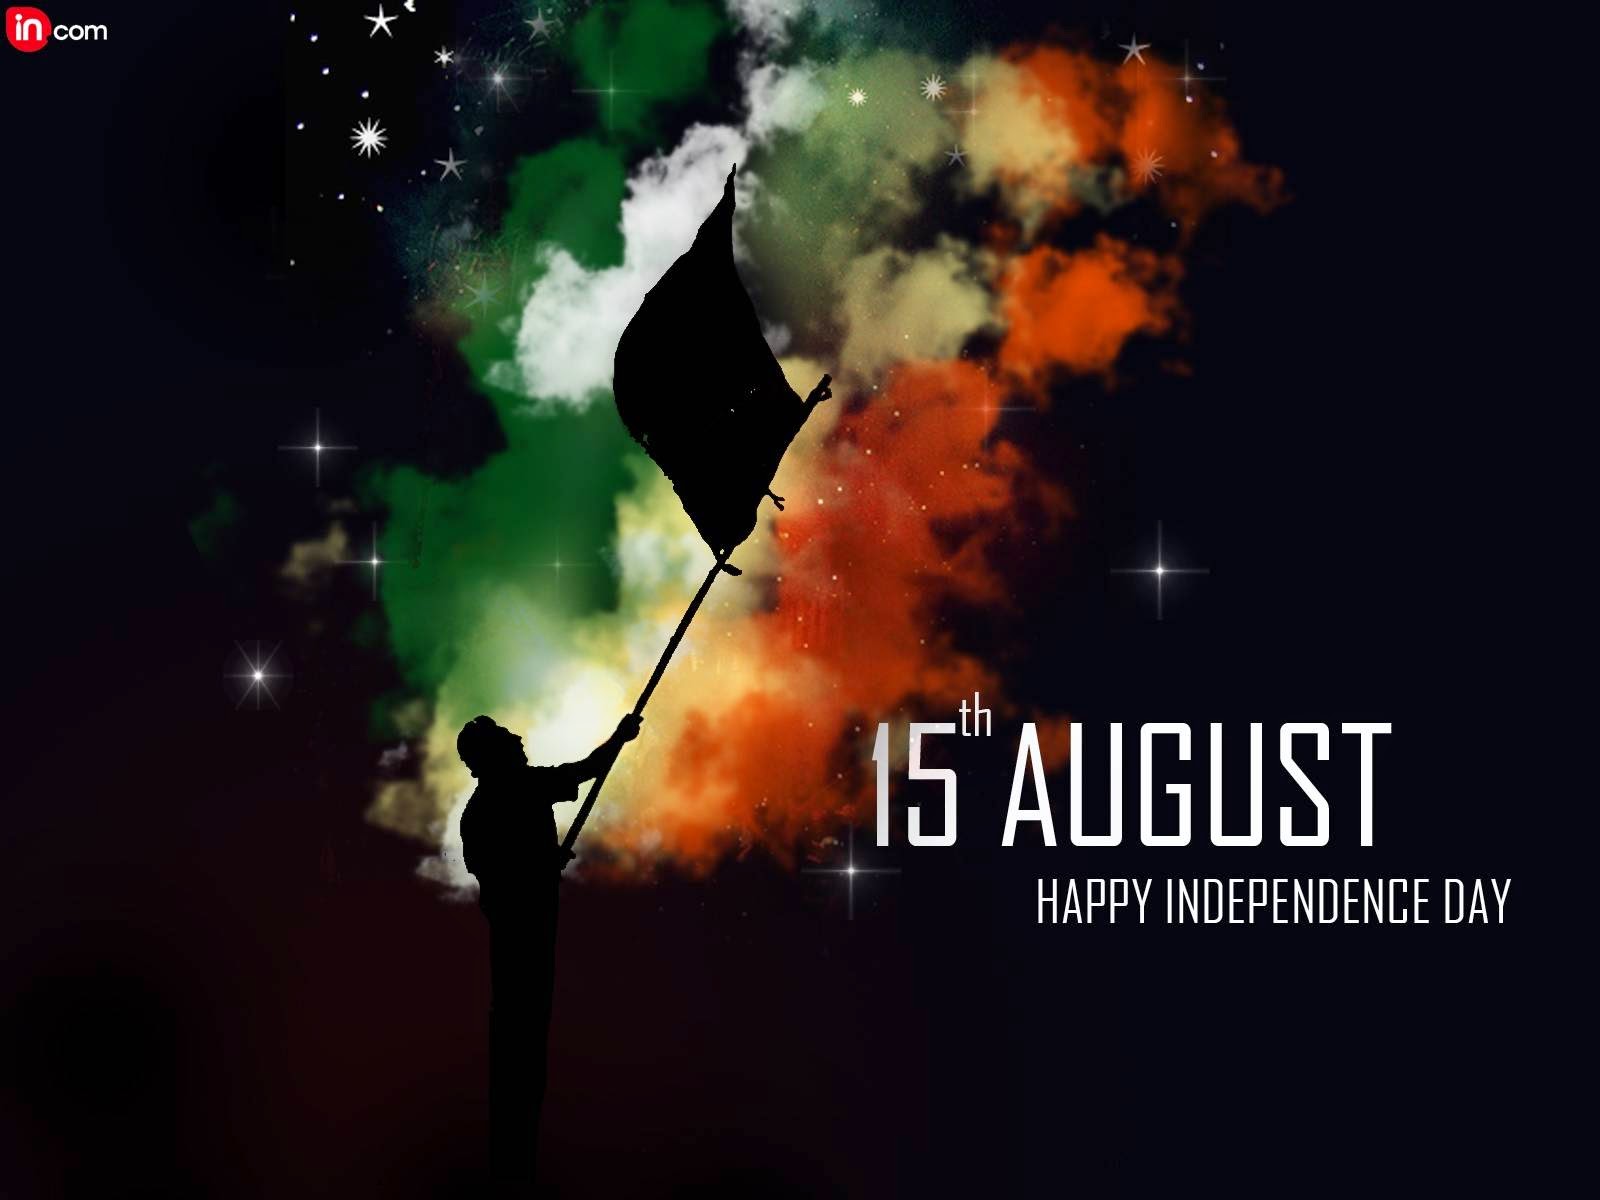 HD Wallpapers Blog: India Independence Day HD Wallpapers